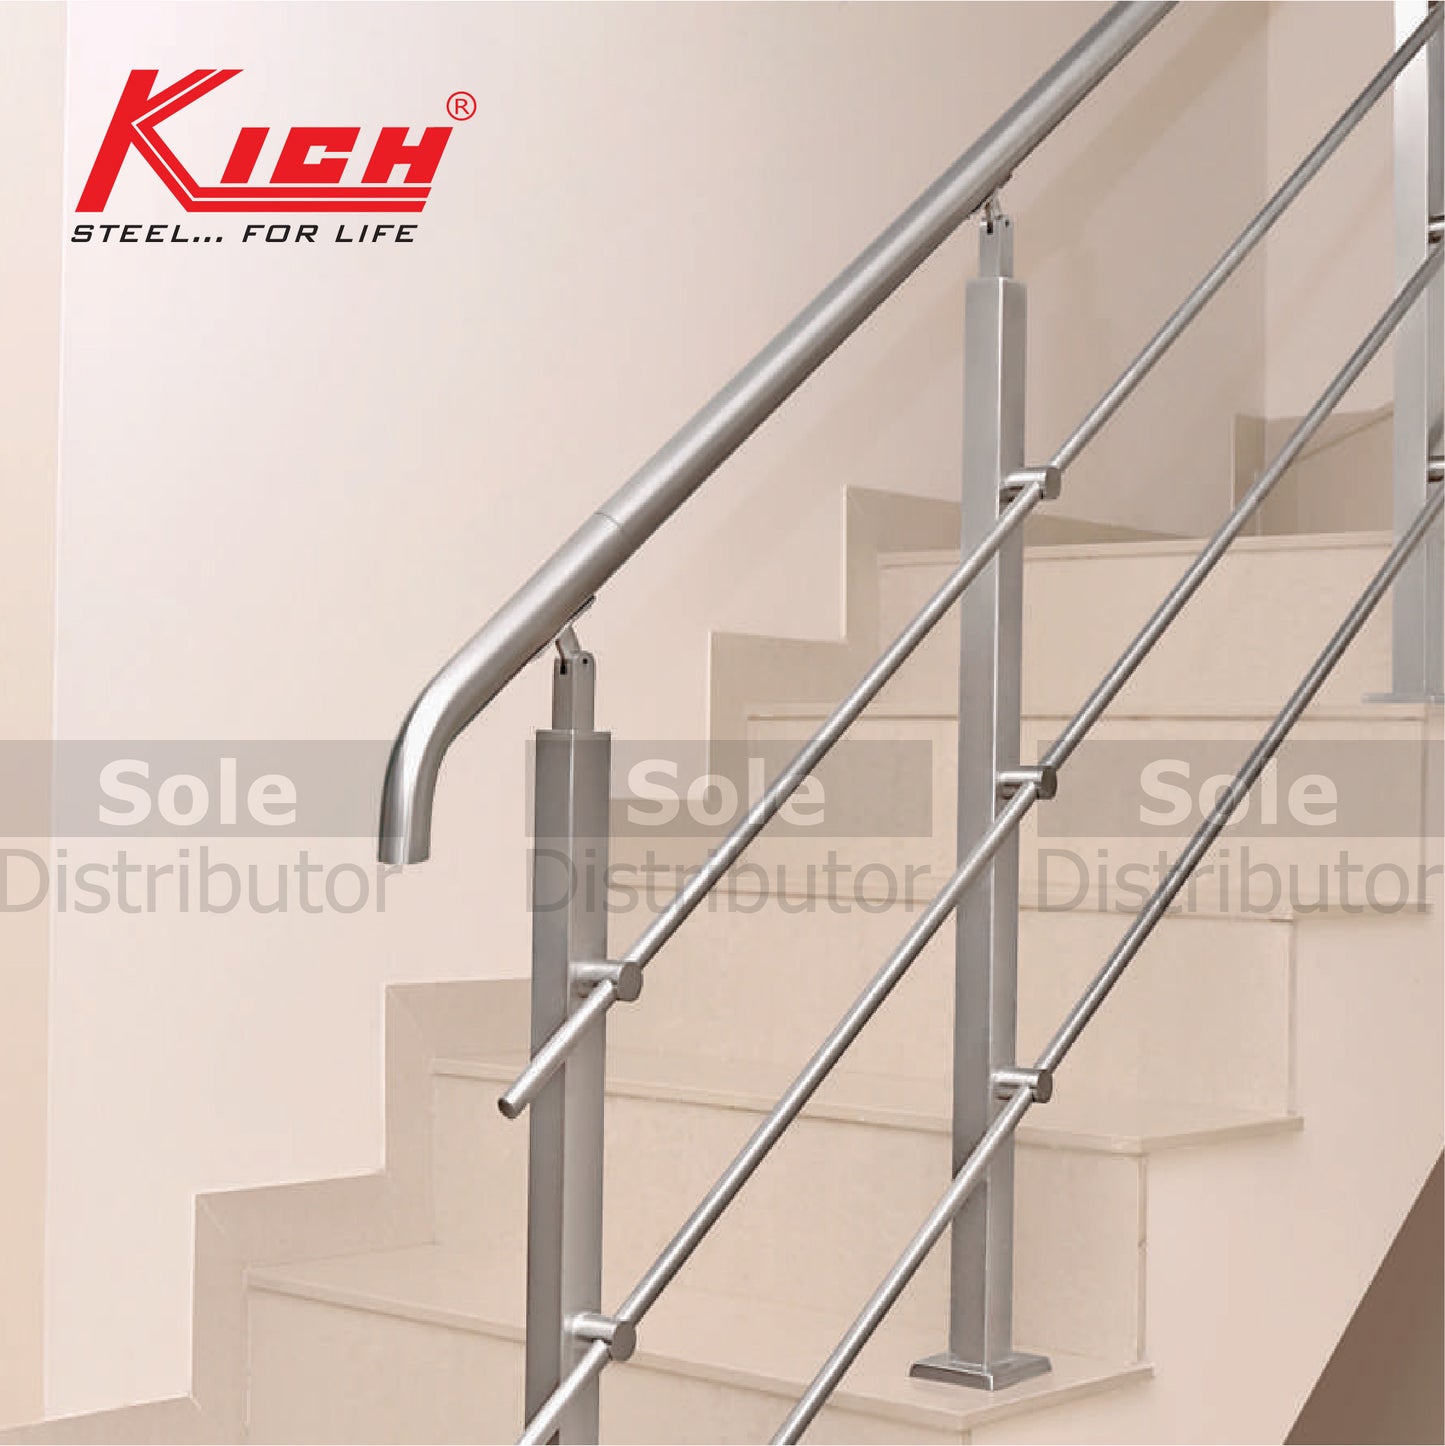 Kich Hand Rail Top Mounted Square Baluster System With Horizontal Members Stainless Steel 316 Grade - DT31-1-163